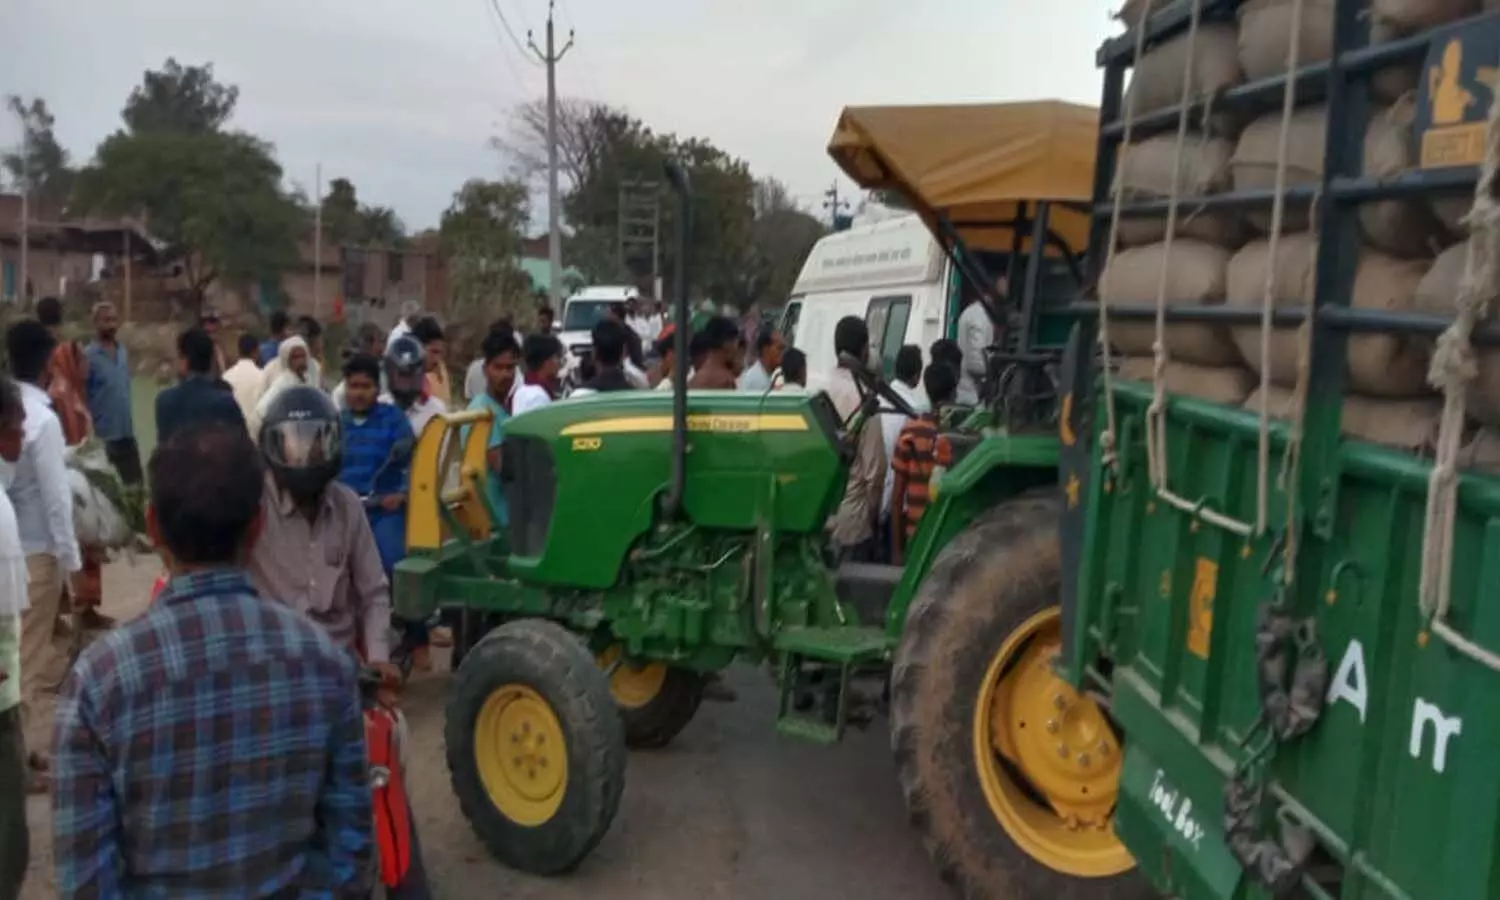 Tractor crushed girl going home in Jalaun, death